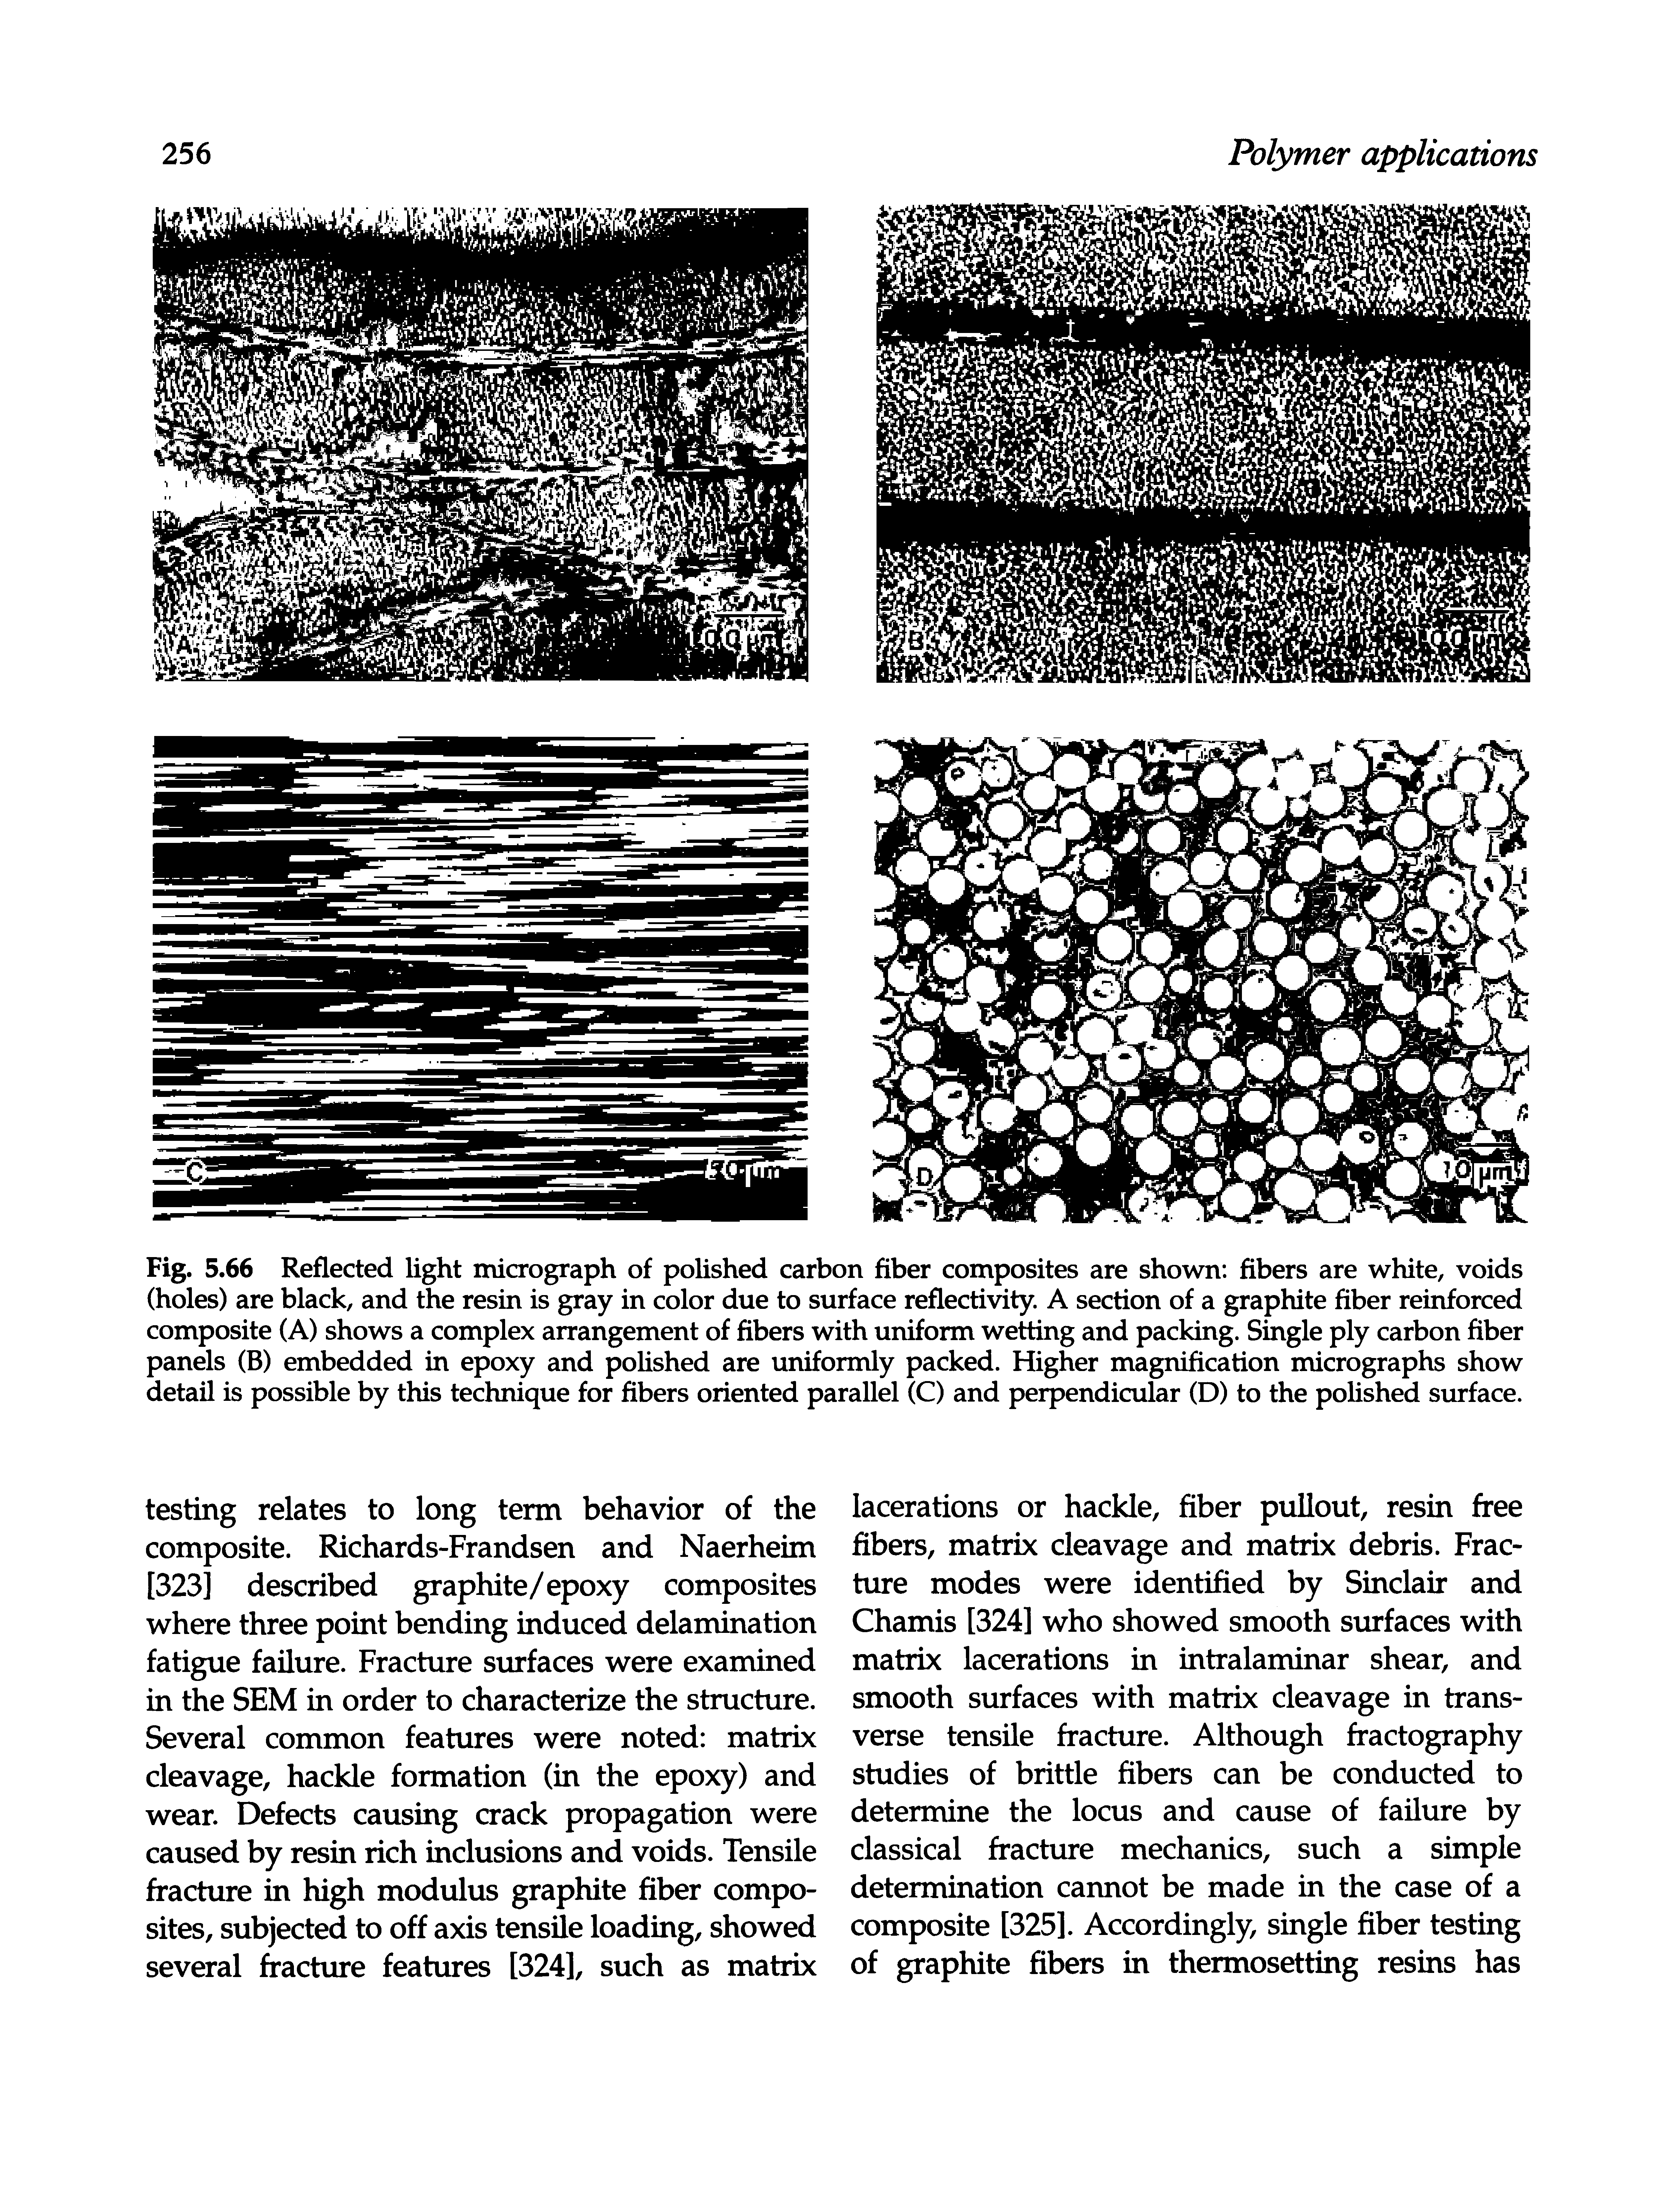 Fig. 5.66 Reflected light micrograph of polished carbon fiber composites are shown fibers are white, voids (holes) are black, and the resin is gray in color due to surface reflectivity. A section of a graphite fiber reinforced composite (A) shows a complex arrangement of fibers with uniform wetting and packing. Single ply carbon fiber panels (B) embedded in epoxy and polished are uniformly packed. Higher magnification micrographs show detail is possible by this technique for fibers oriented parallel (C) and perpendicular (D) to the polished surface.